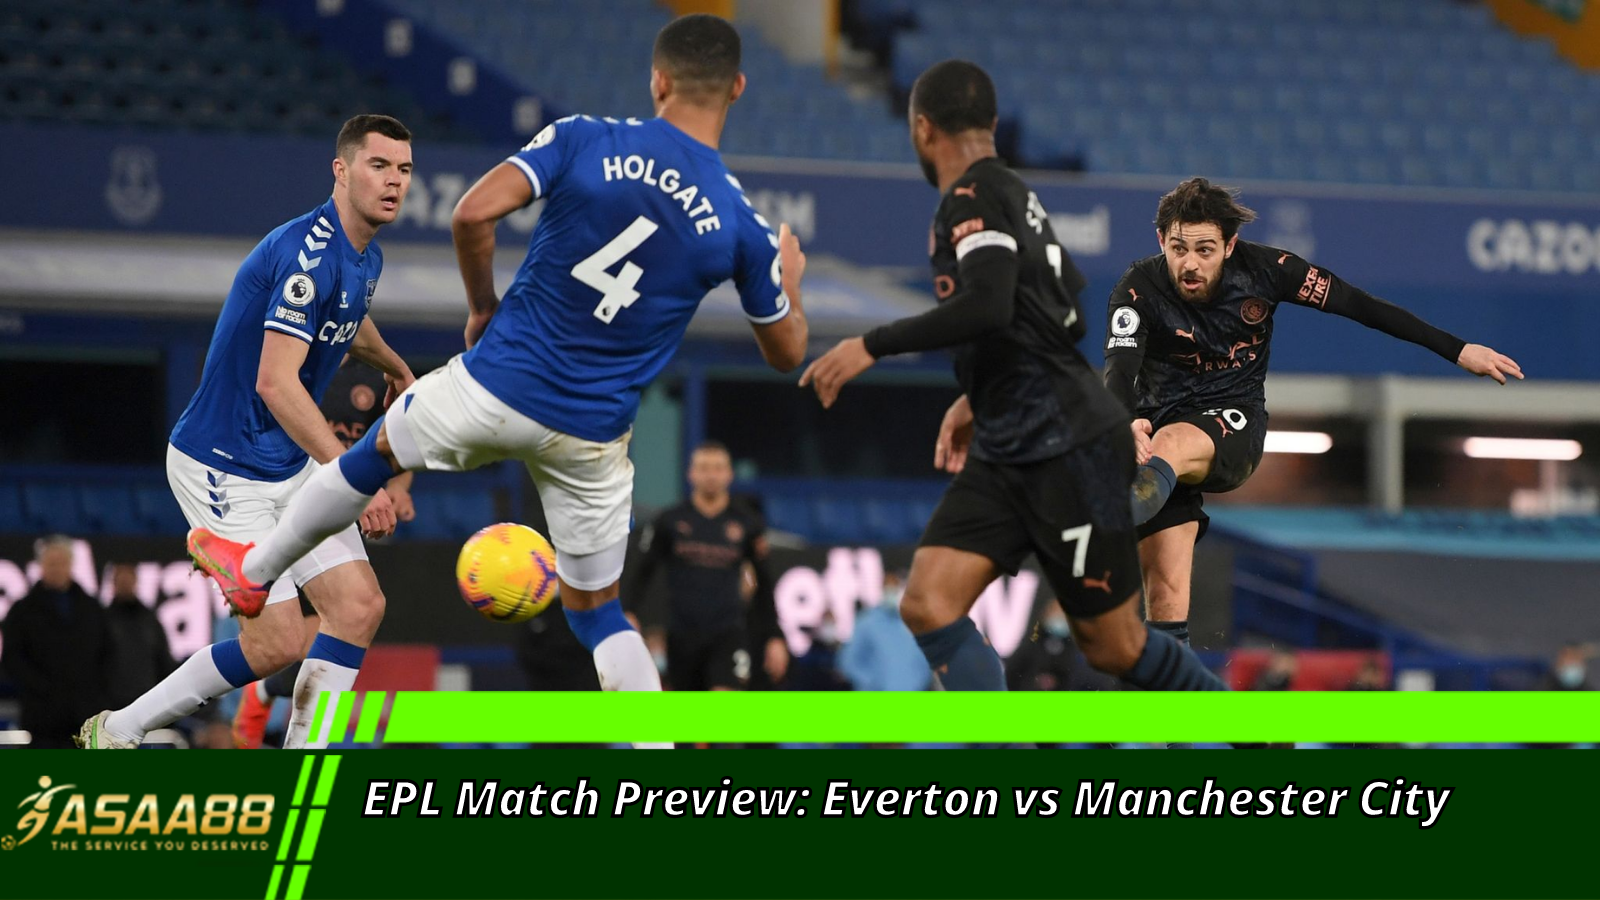 EPL Match Preview: Everton vs Manchester City